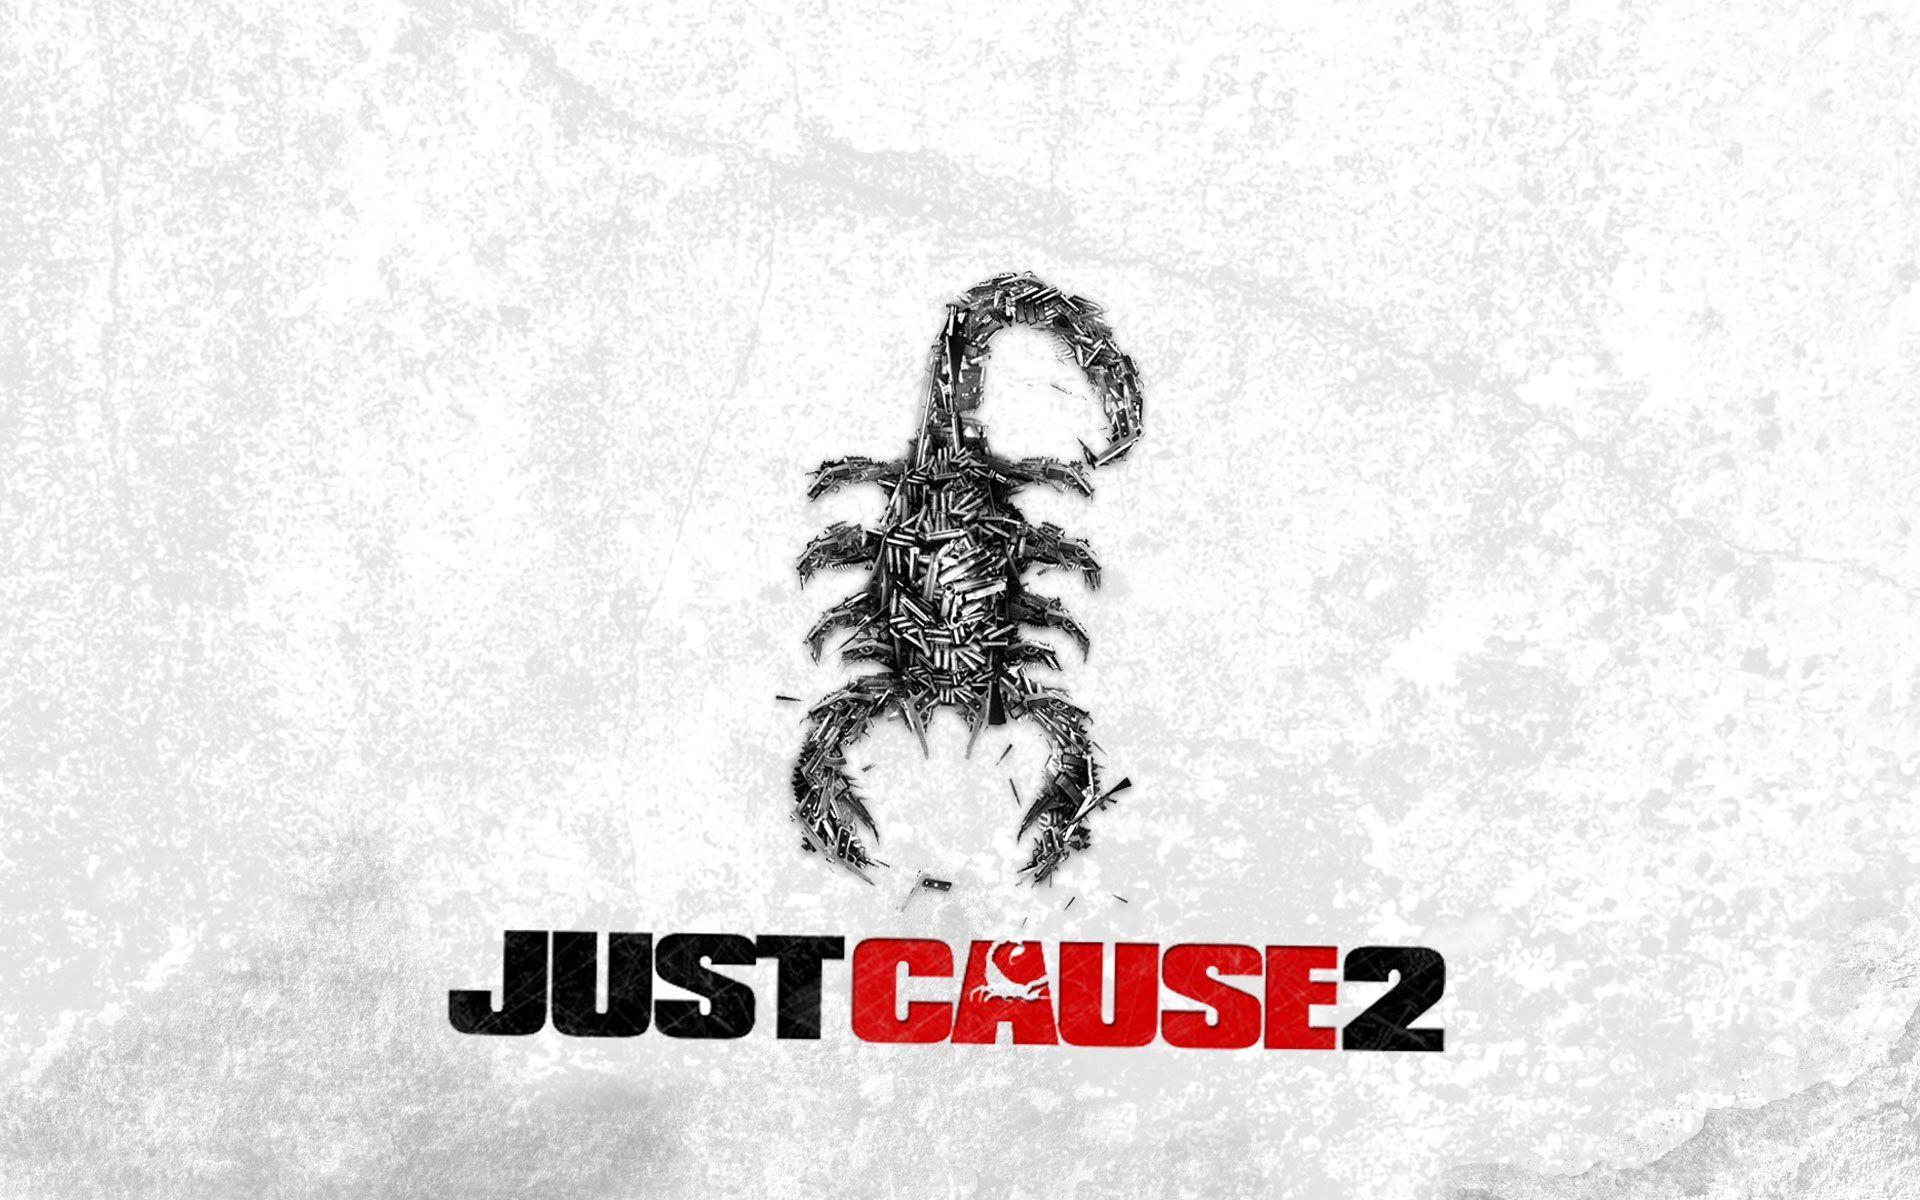 Just Cause 2 Wallpaper 16100 1920x1200 px